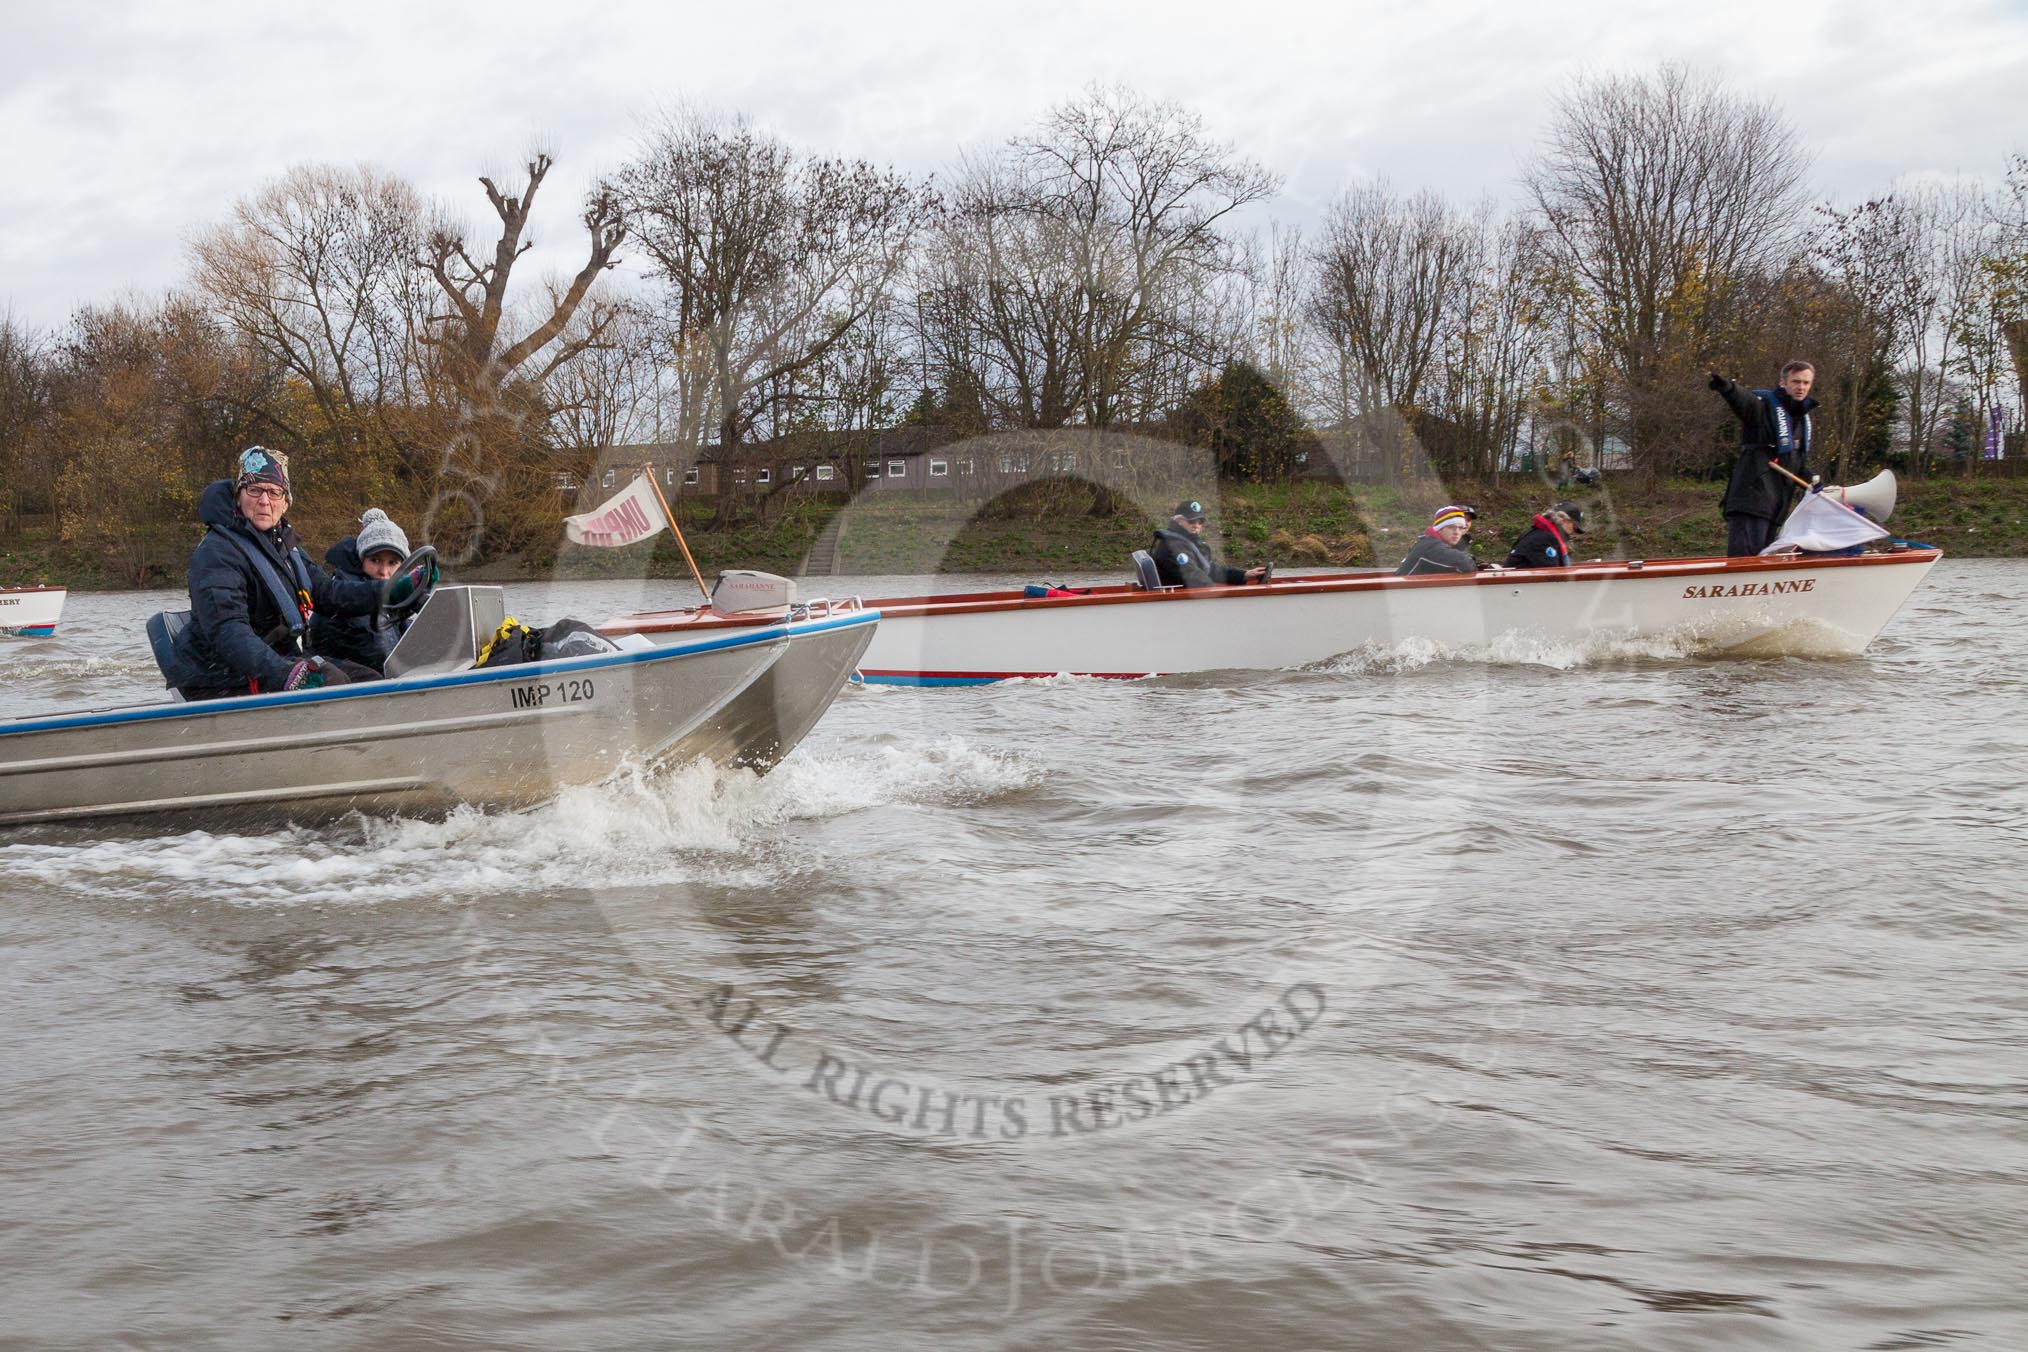 The Boat Race season 2016 - Women's Boat Race Trial Eights (OUWBC, Oxford): OUWBC Head Coach Christine Wilson following the race in the tin boat, behind the umpire's launch with race umpire Rob Clegg.
River Thames between Putney Bridge and Mortlake,
London SW15,

United Kingdom,
on 10 December 2015 at 12:32, image #270